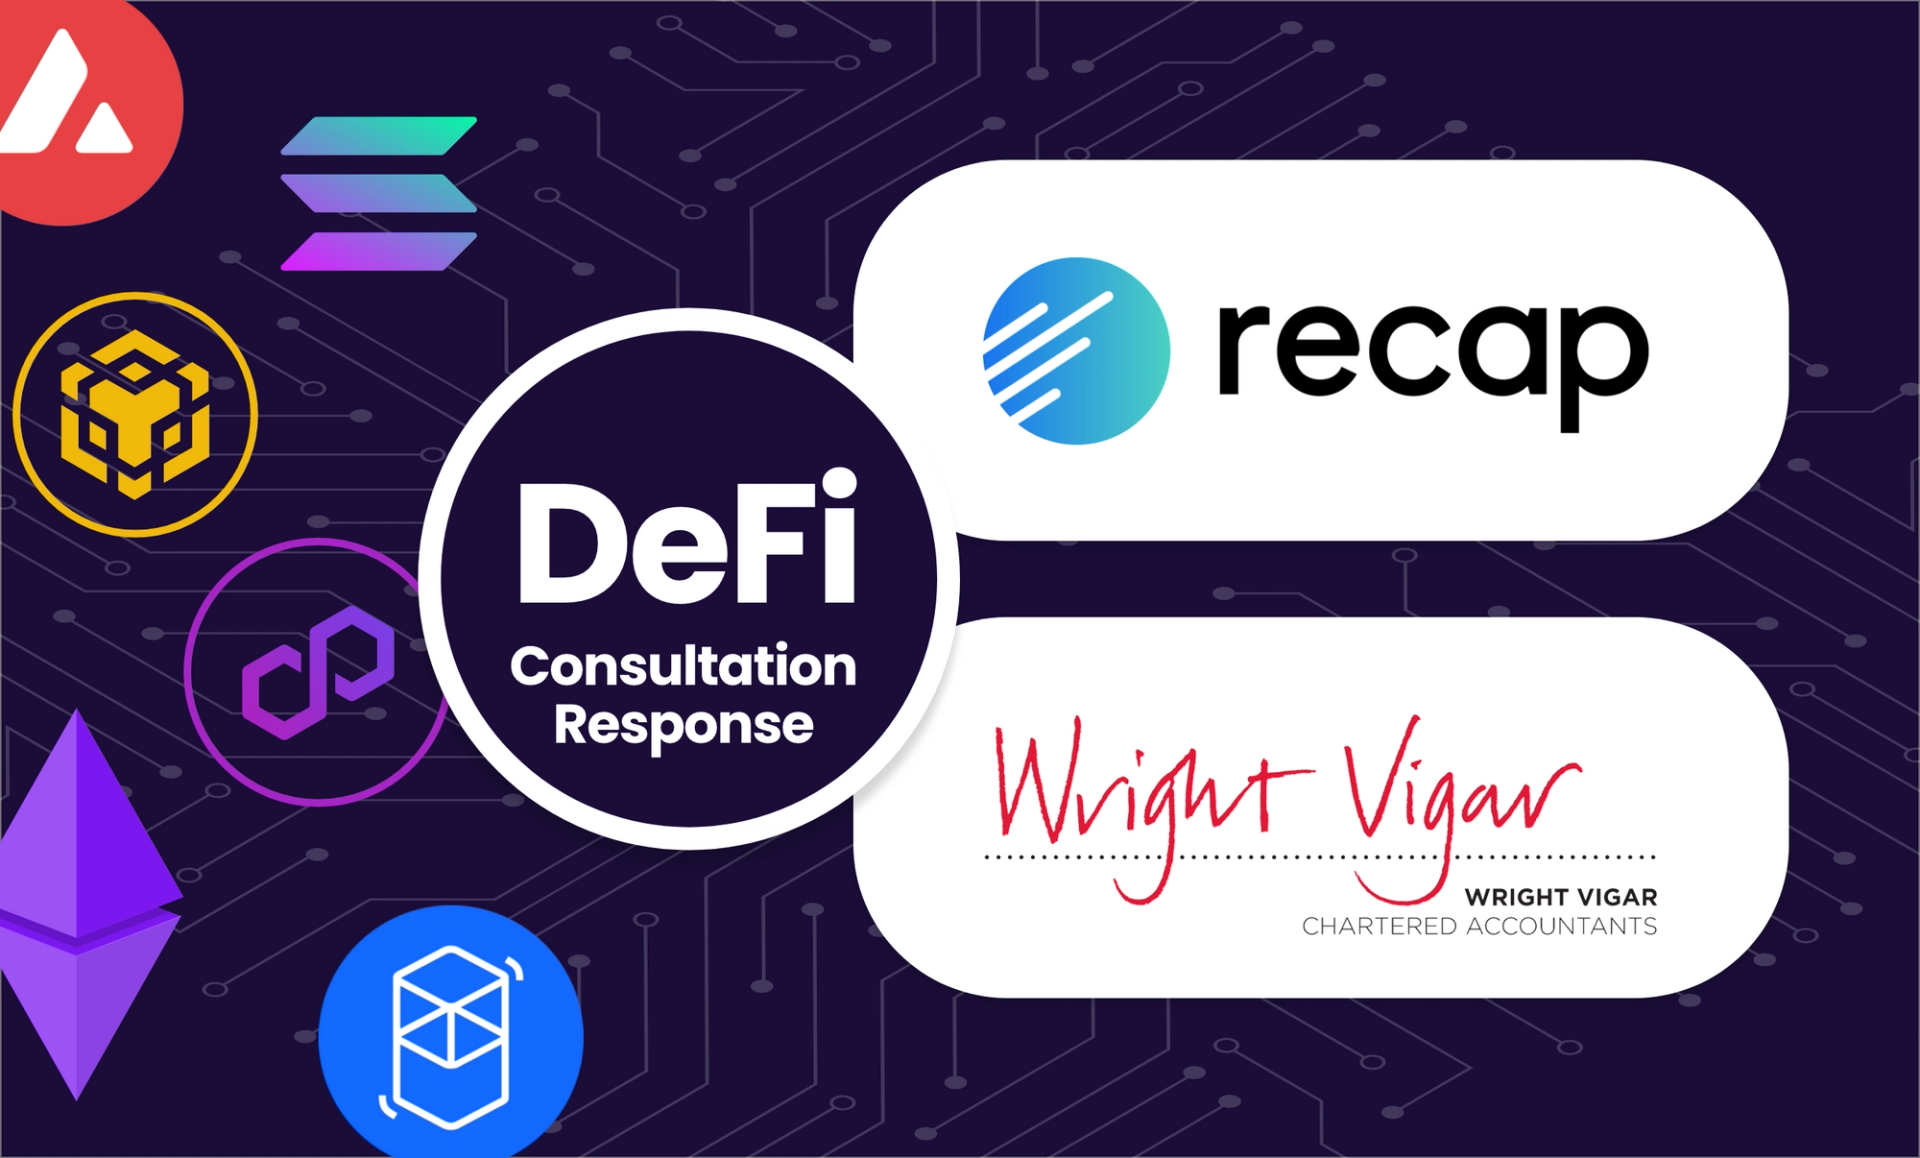 Recap and Wright Vigar logos on an abstract DeFi background with logos of DeFi companies including Ethereum, BSC and Solana